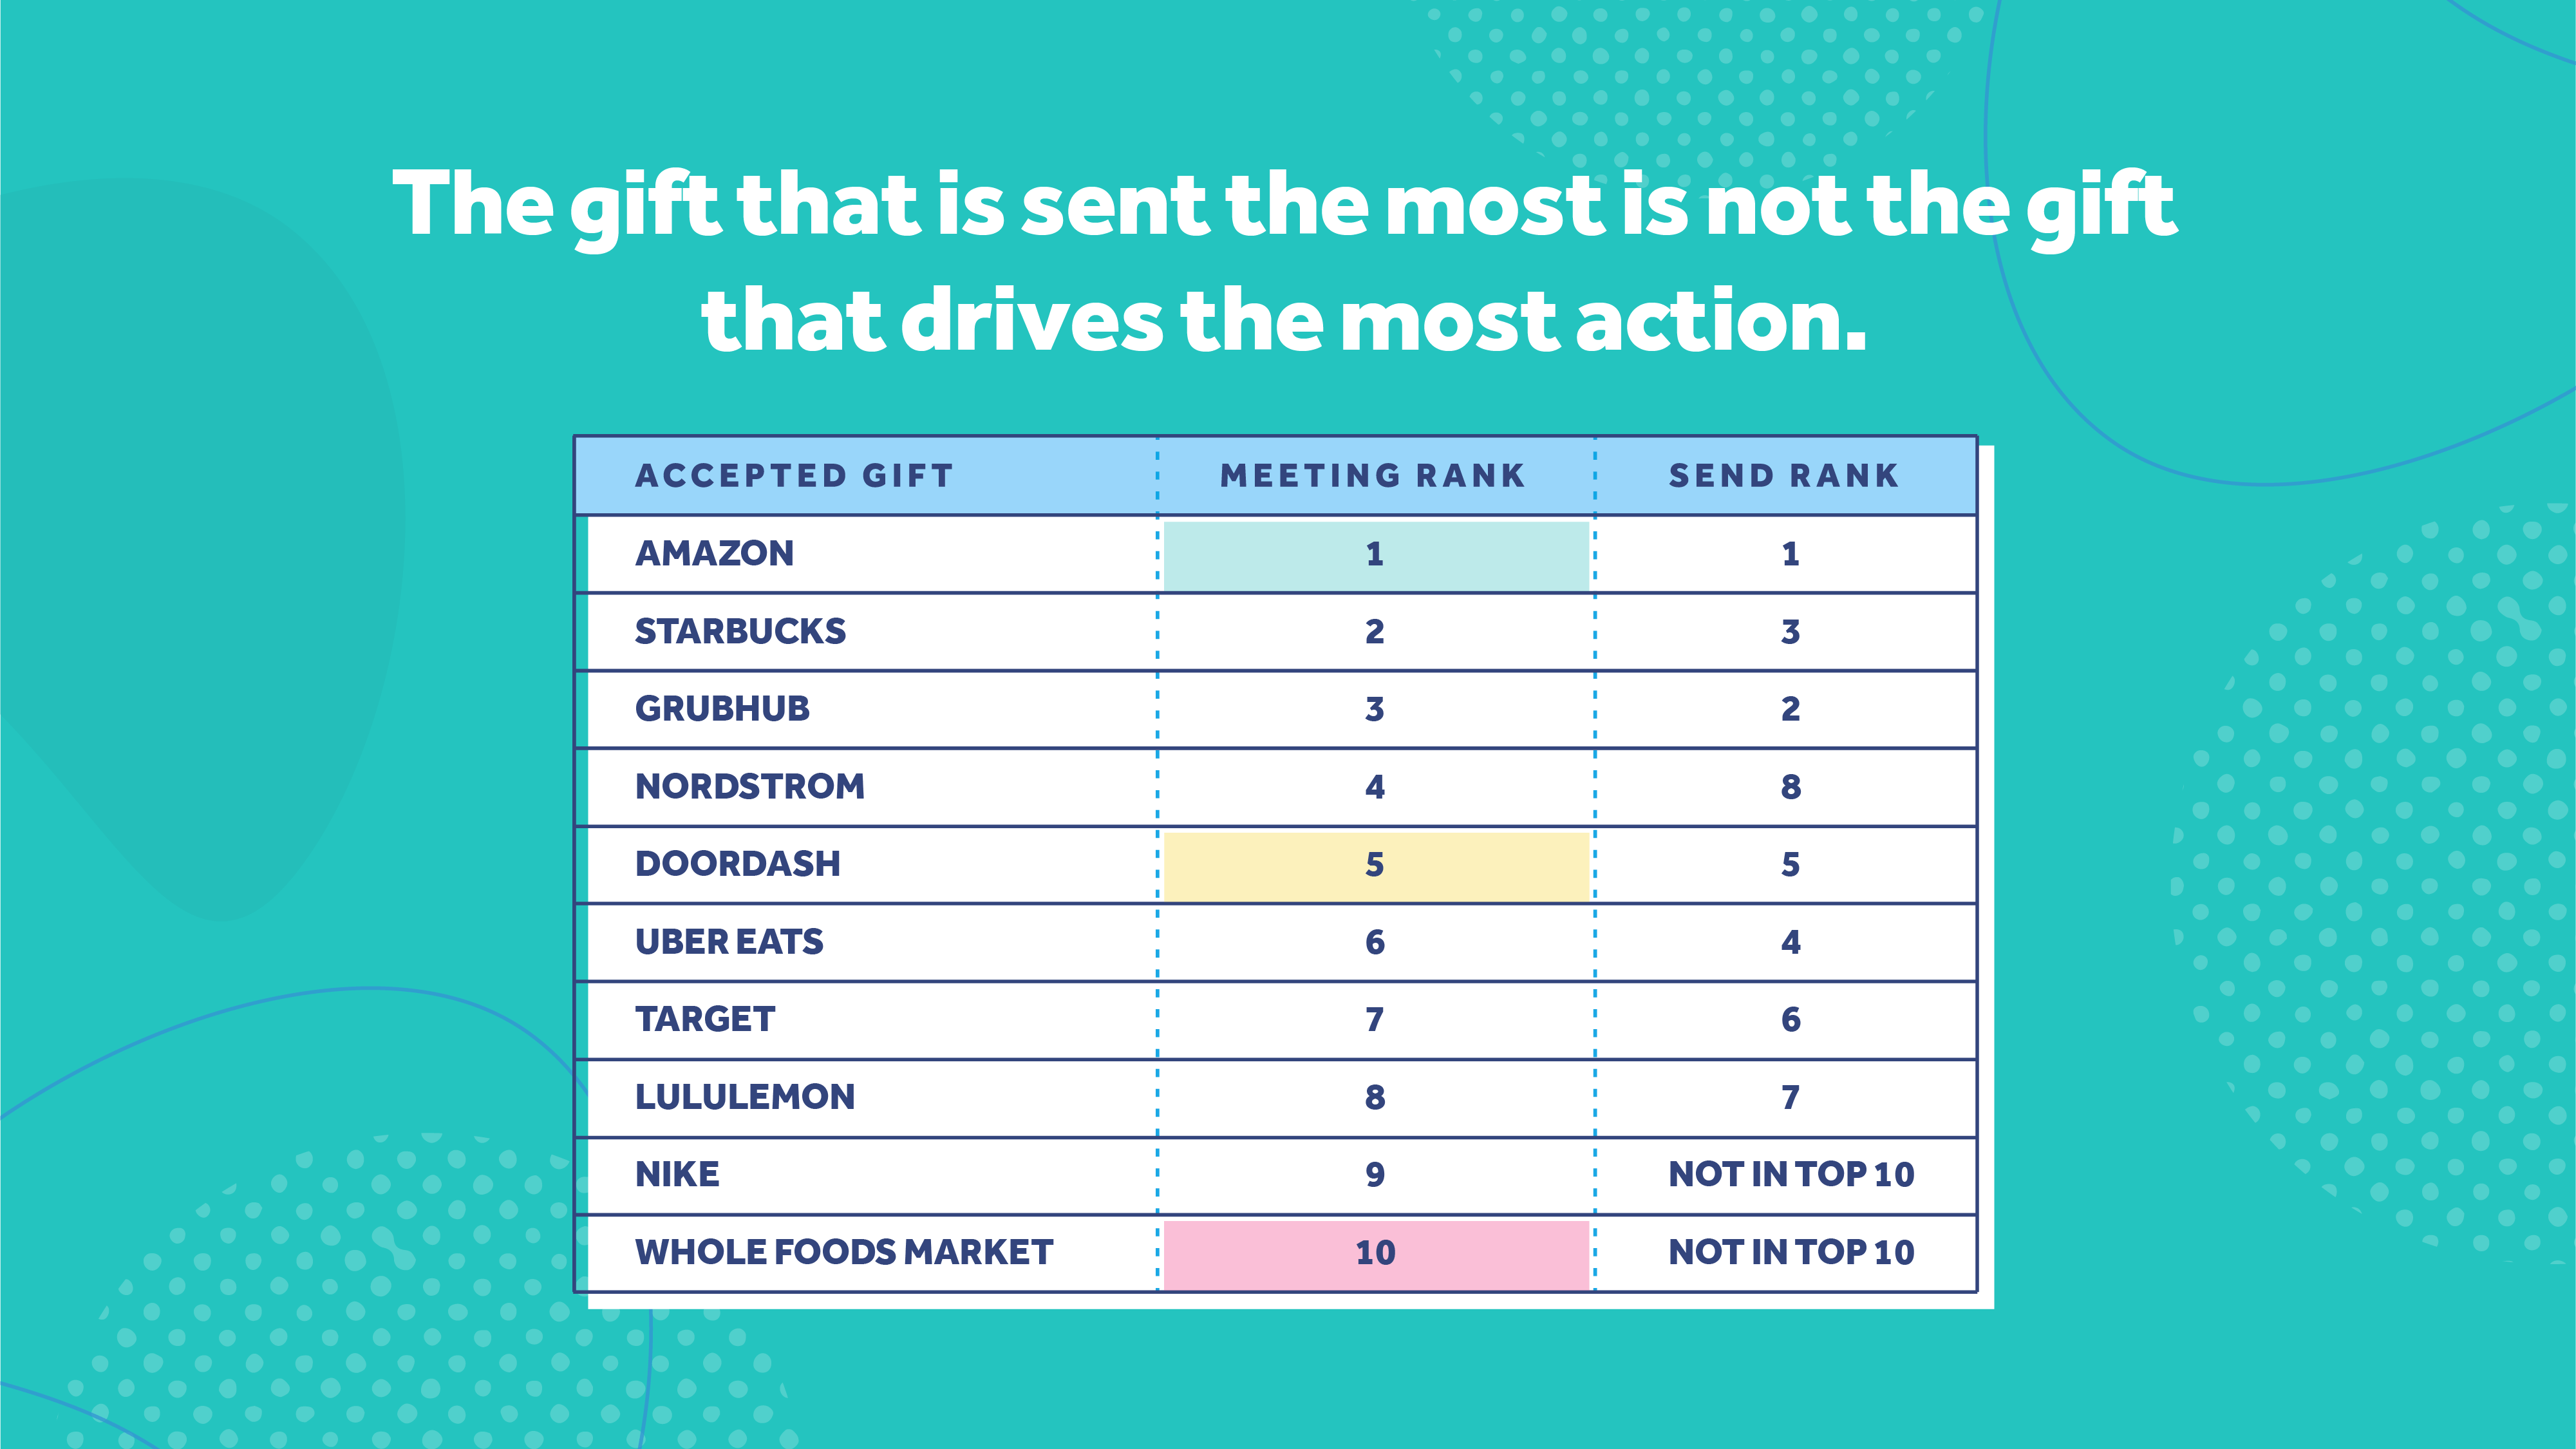 Chart showing accepted gifts versus their meeting and send ranks